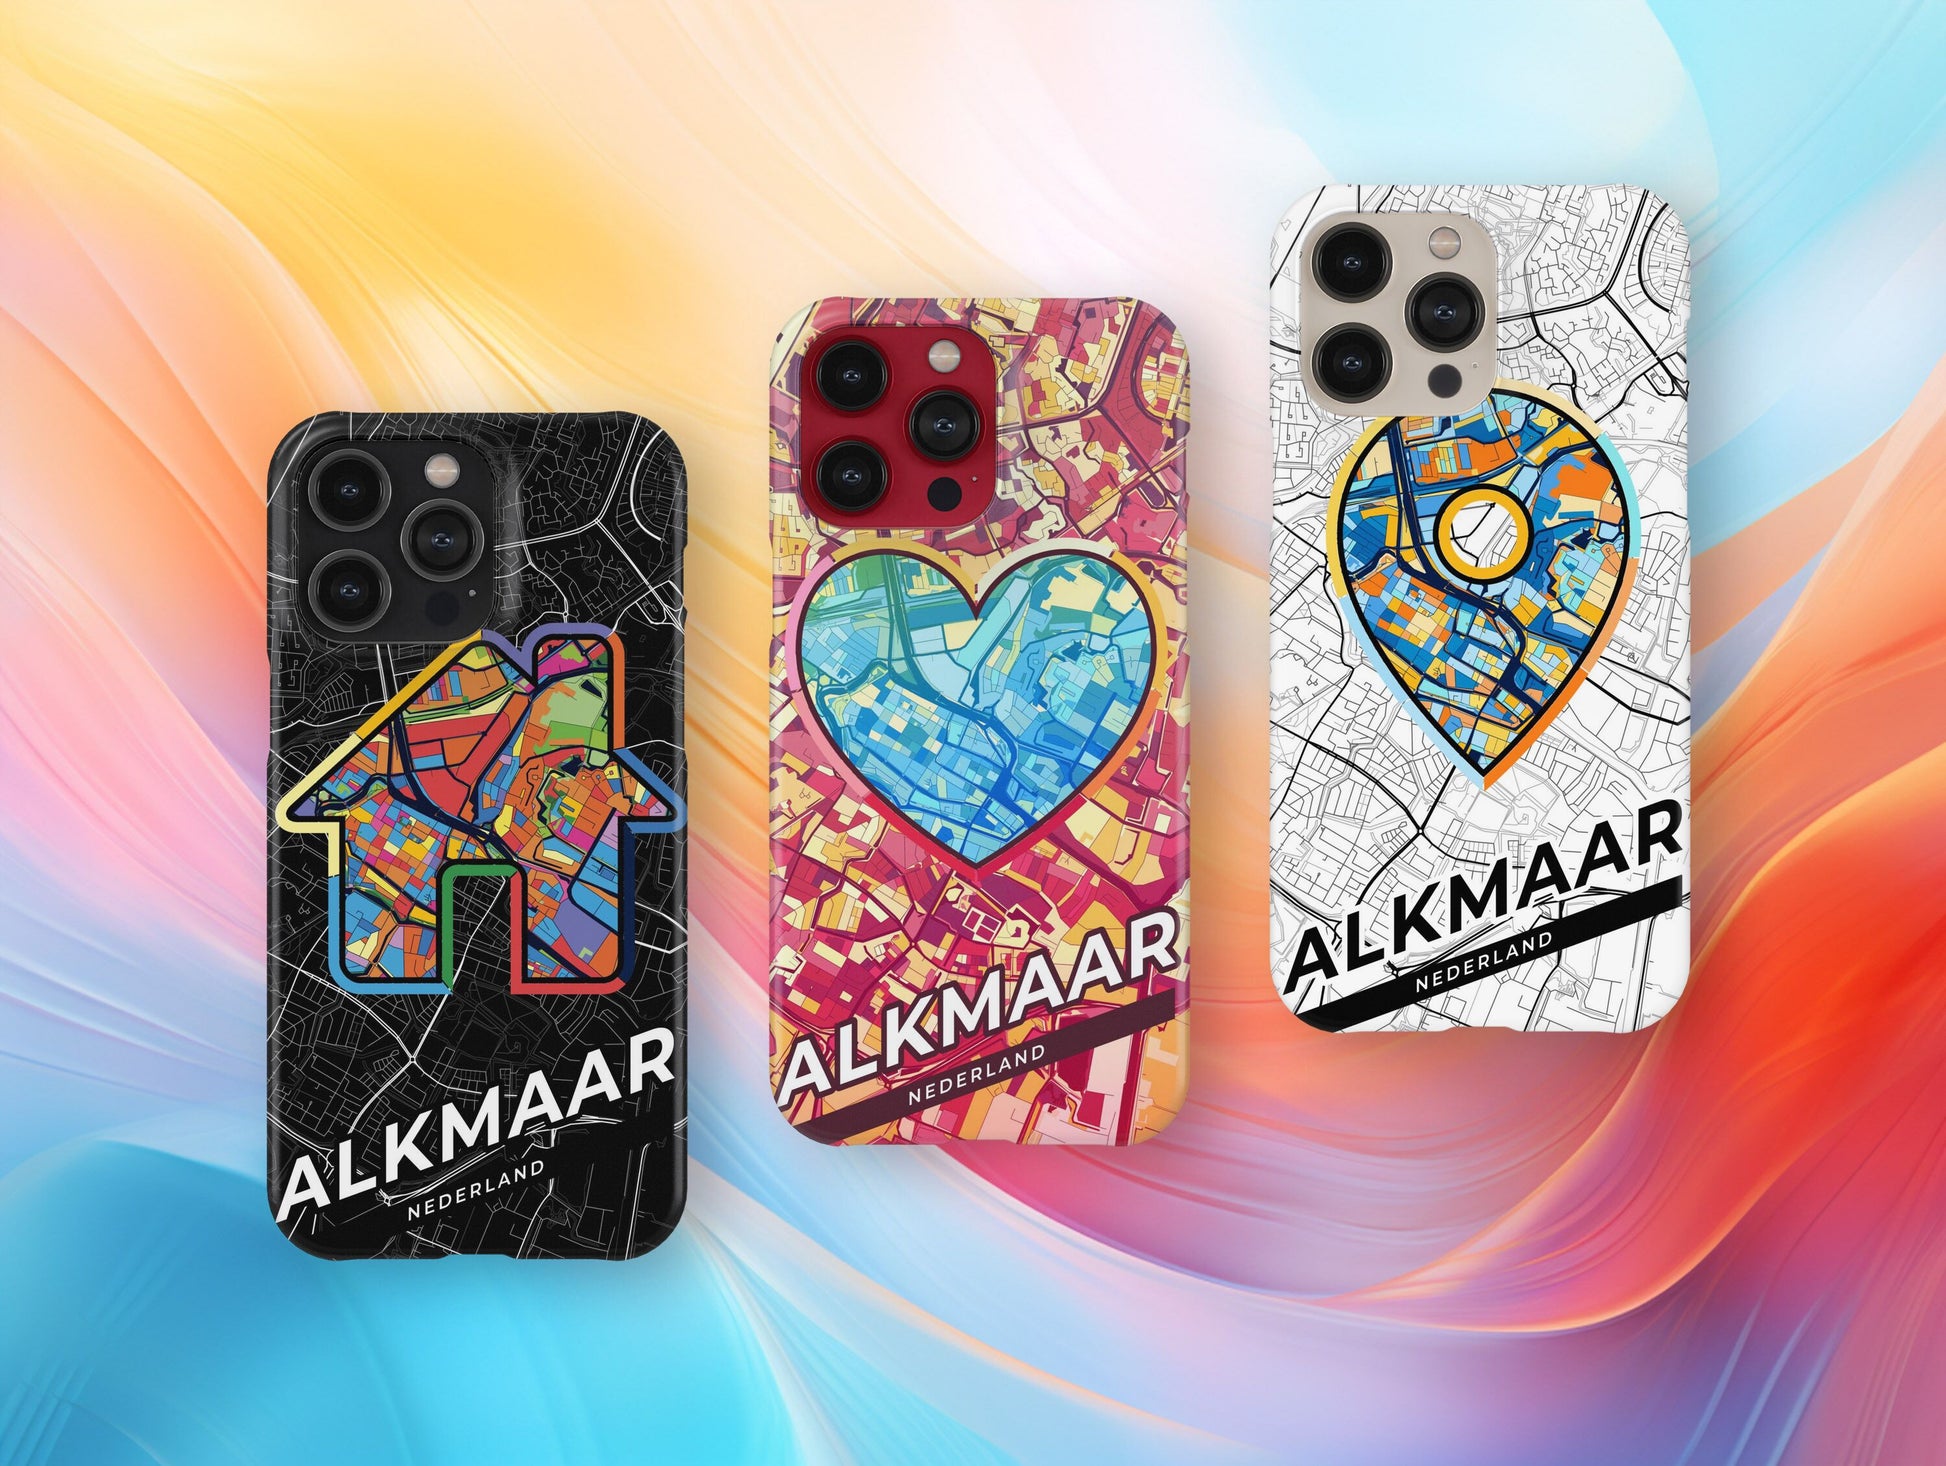 Alkmaar Netherlands slim phone case with colorful icon. Birthday, wedding or housewarming gift. Couple match cases.